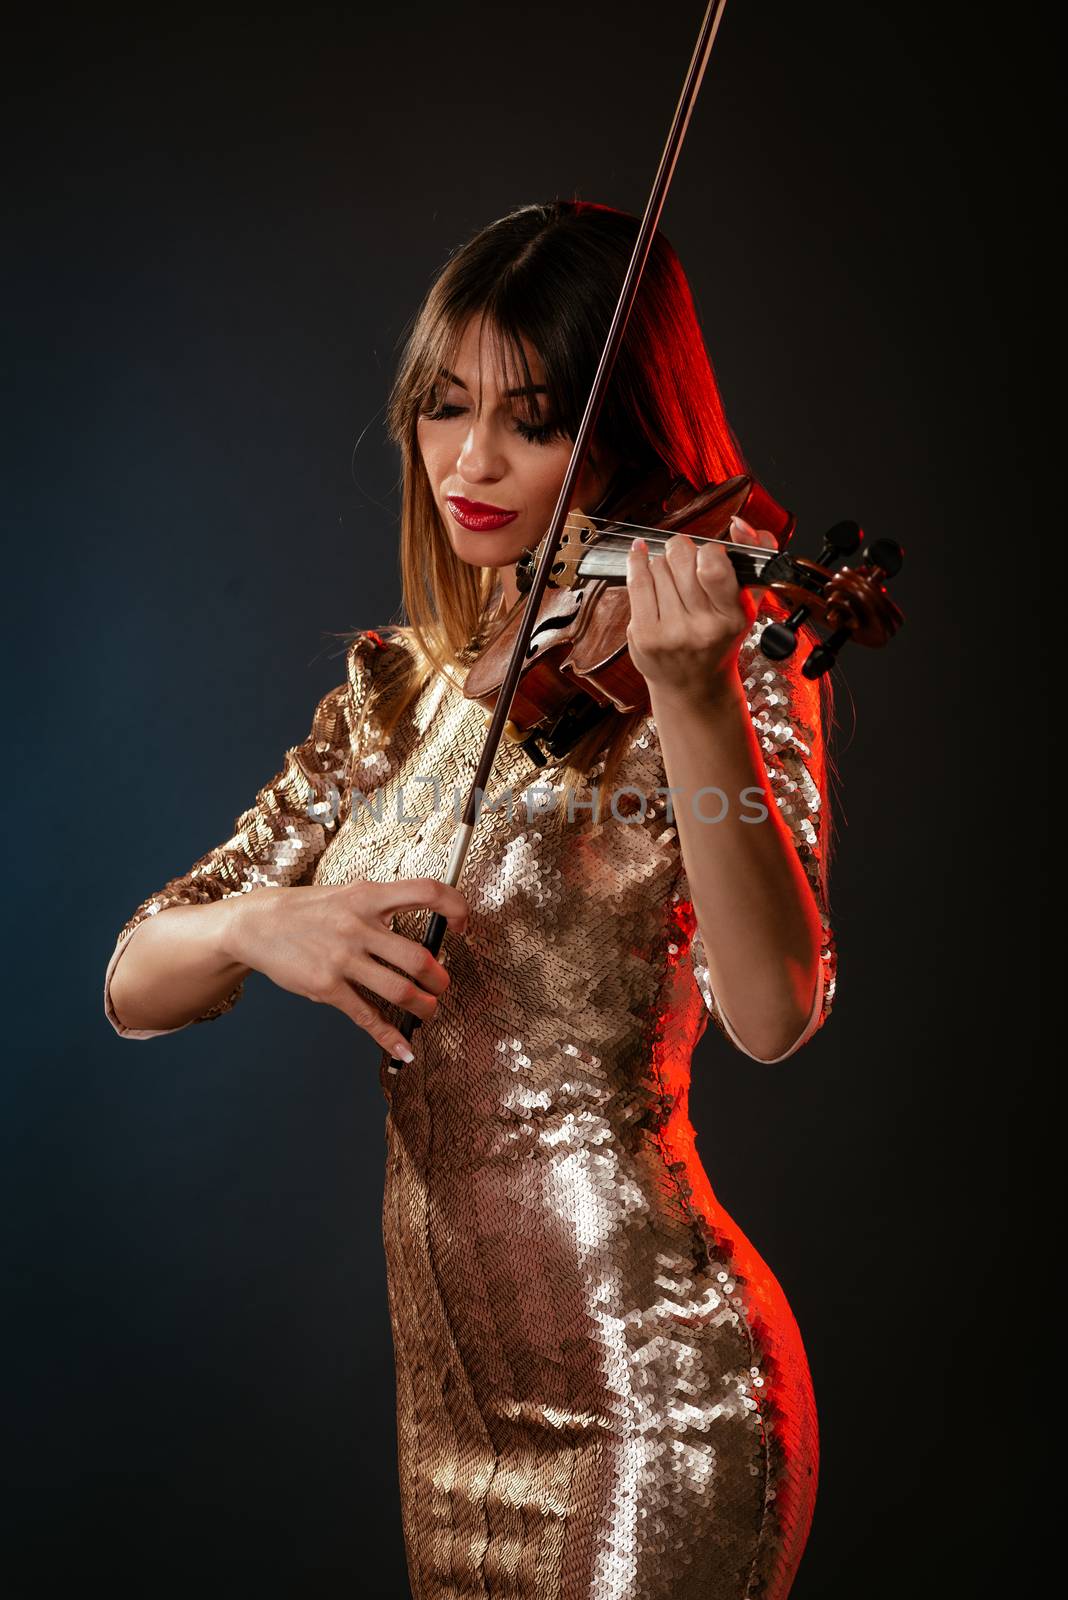 Beautiful young smiling woman in sequin dress playing the violin.